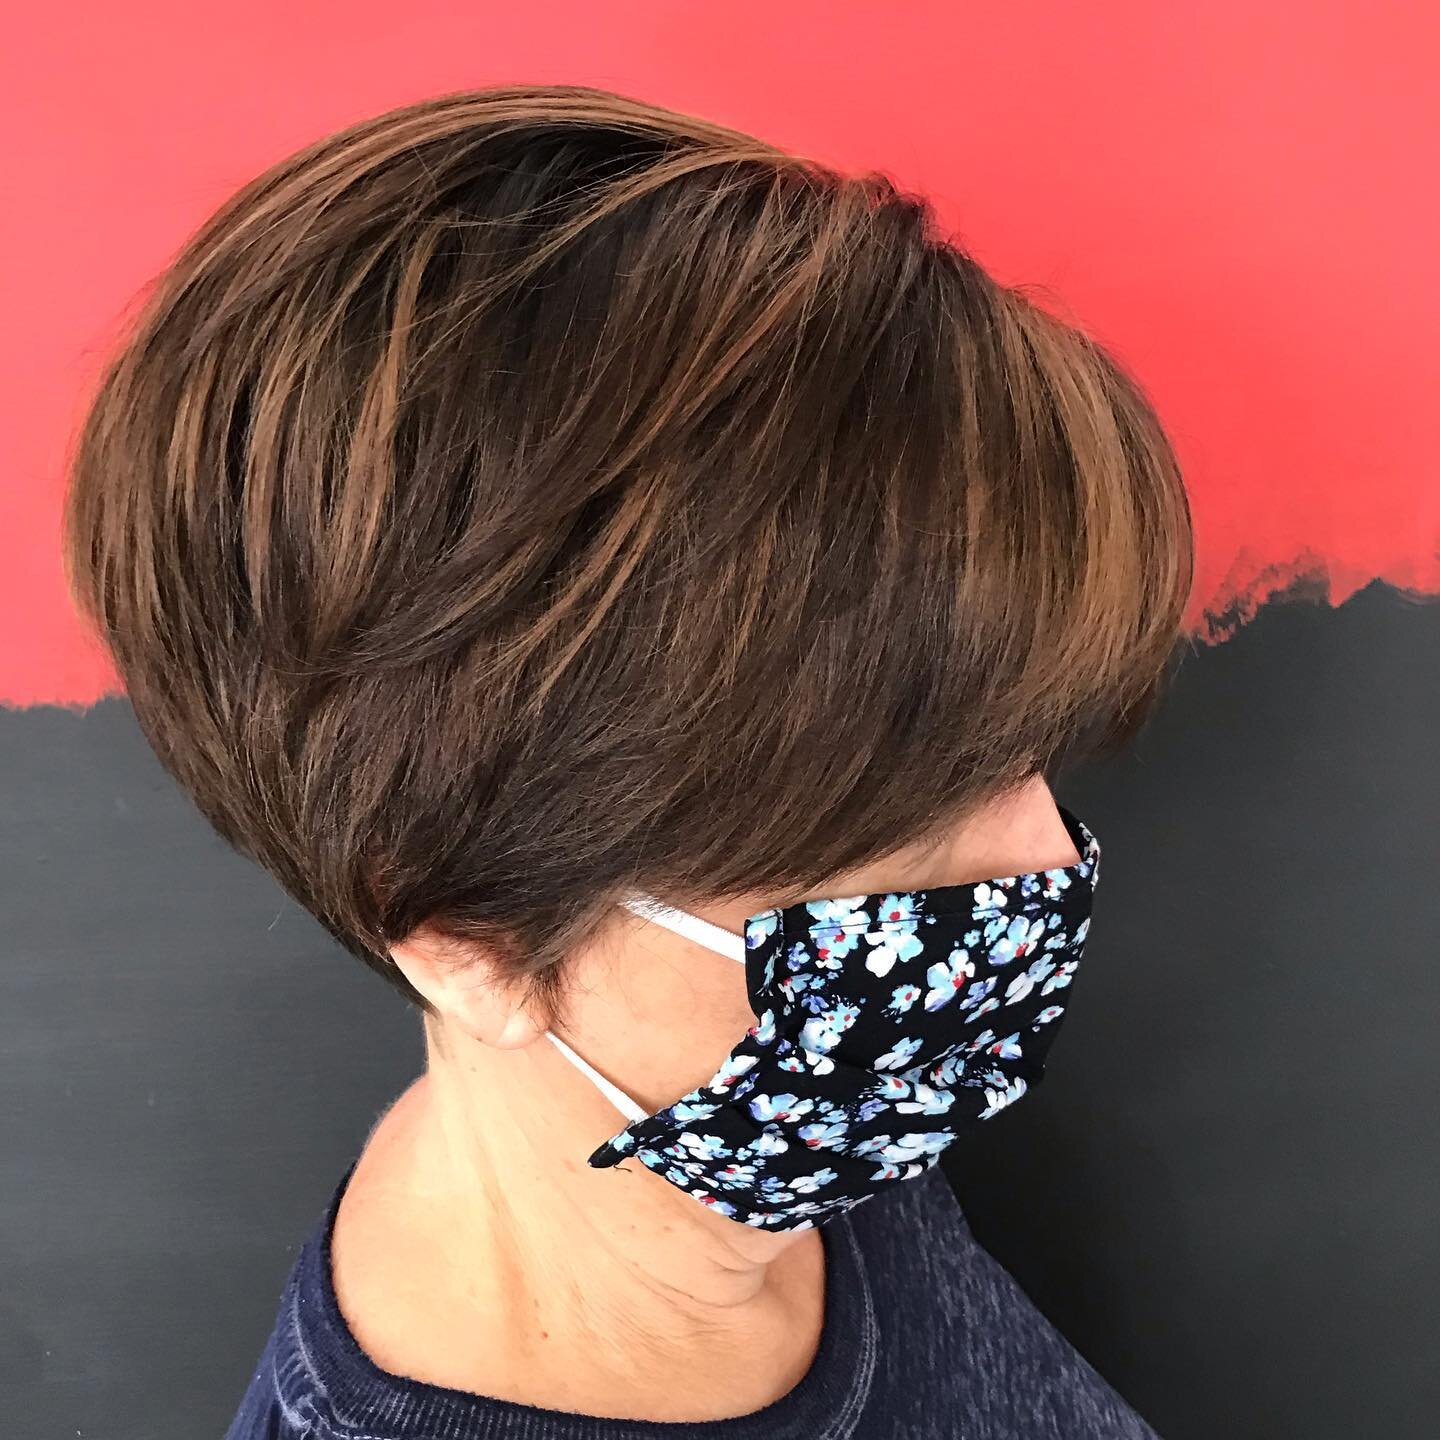 Added dimension and shaped up the cut so it can grow out in a non-mullety way. #kcmostylist #growoutpixie #brunettehighlights